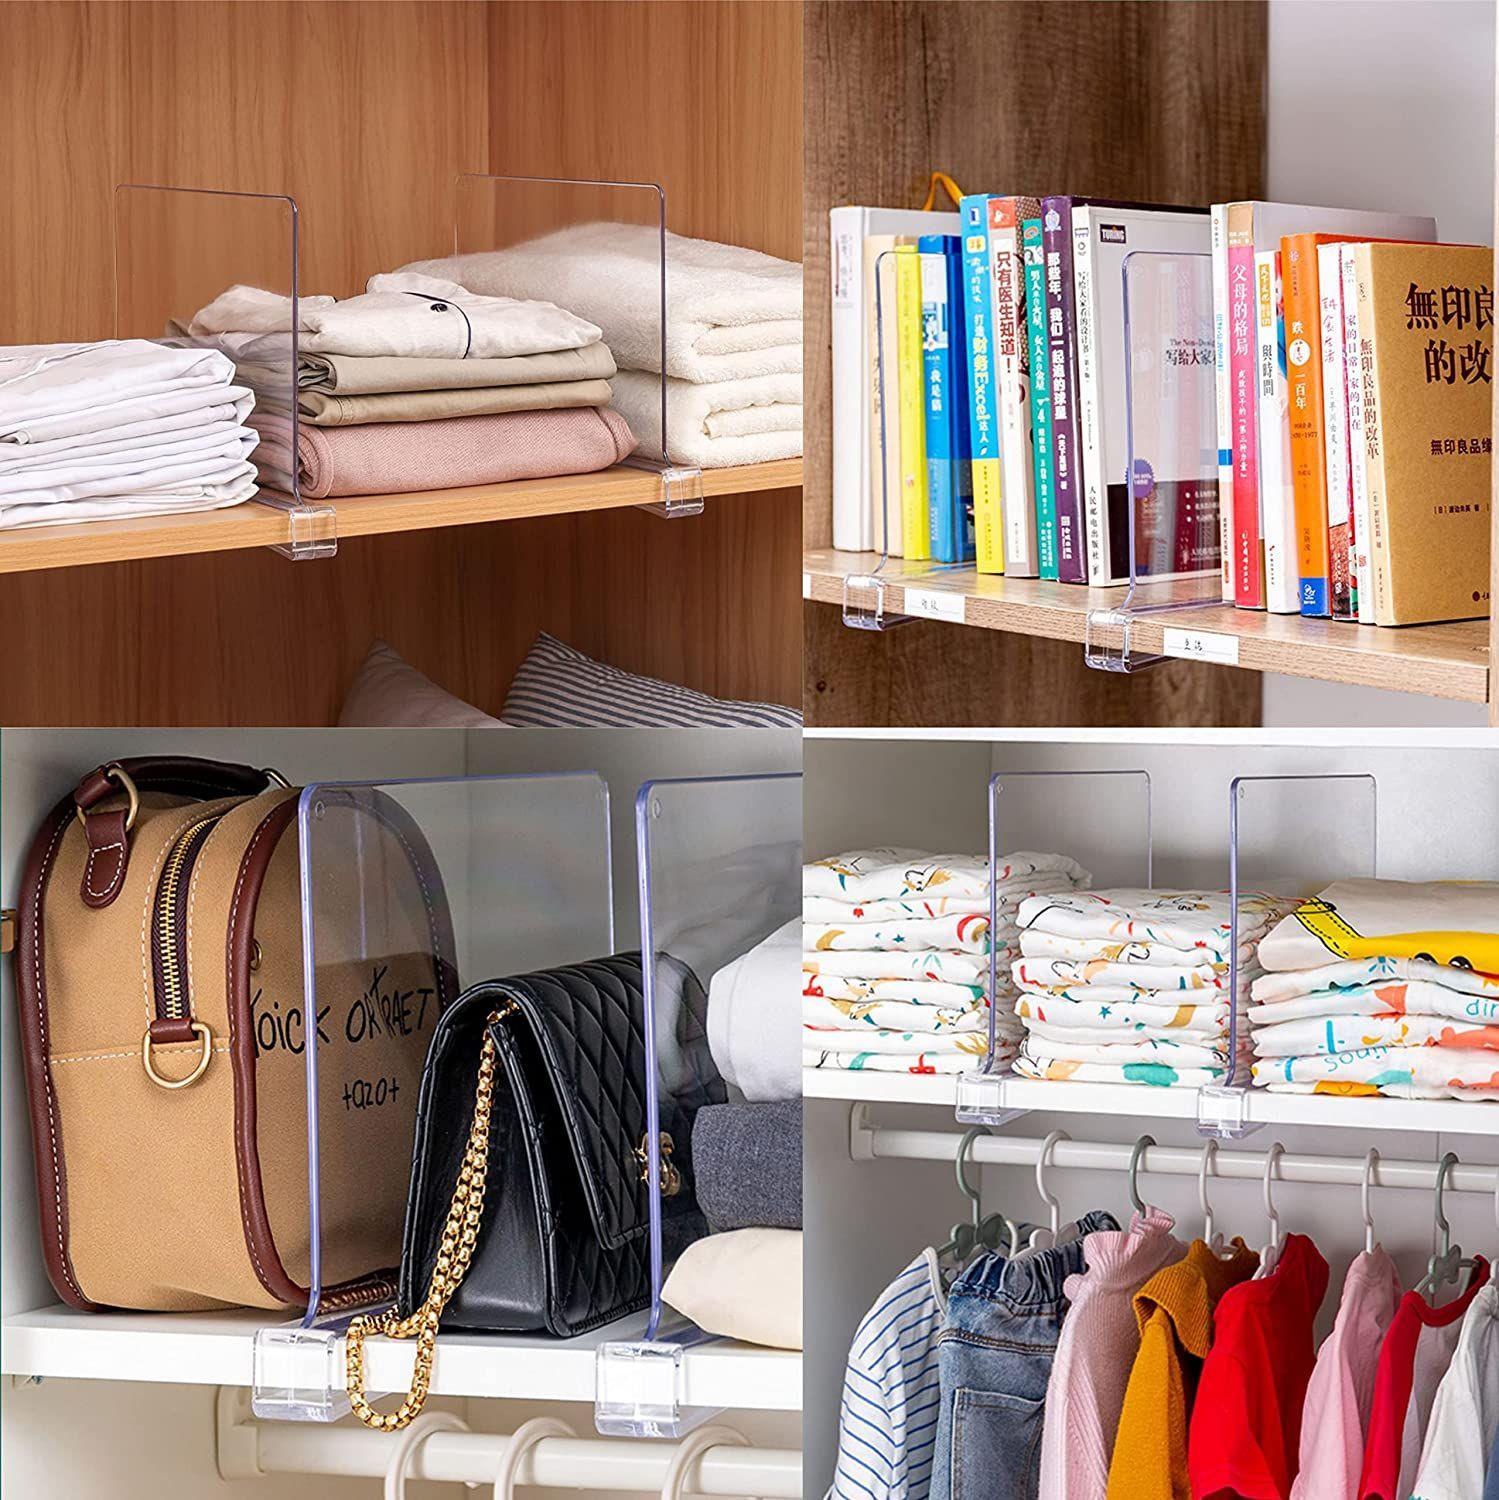 35 Best Closet Organization Ideas To Maximize Space With 4 Shelf Closet Wardrobes (View 8 of 15)